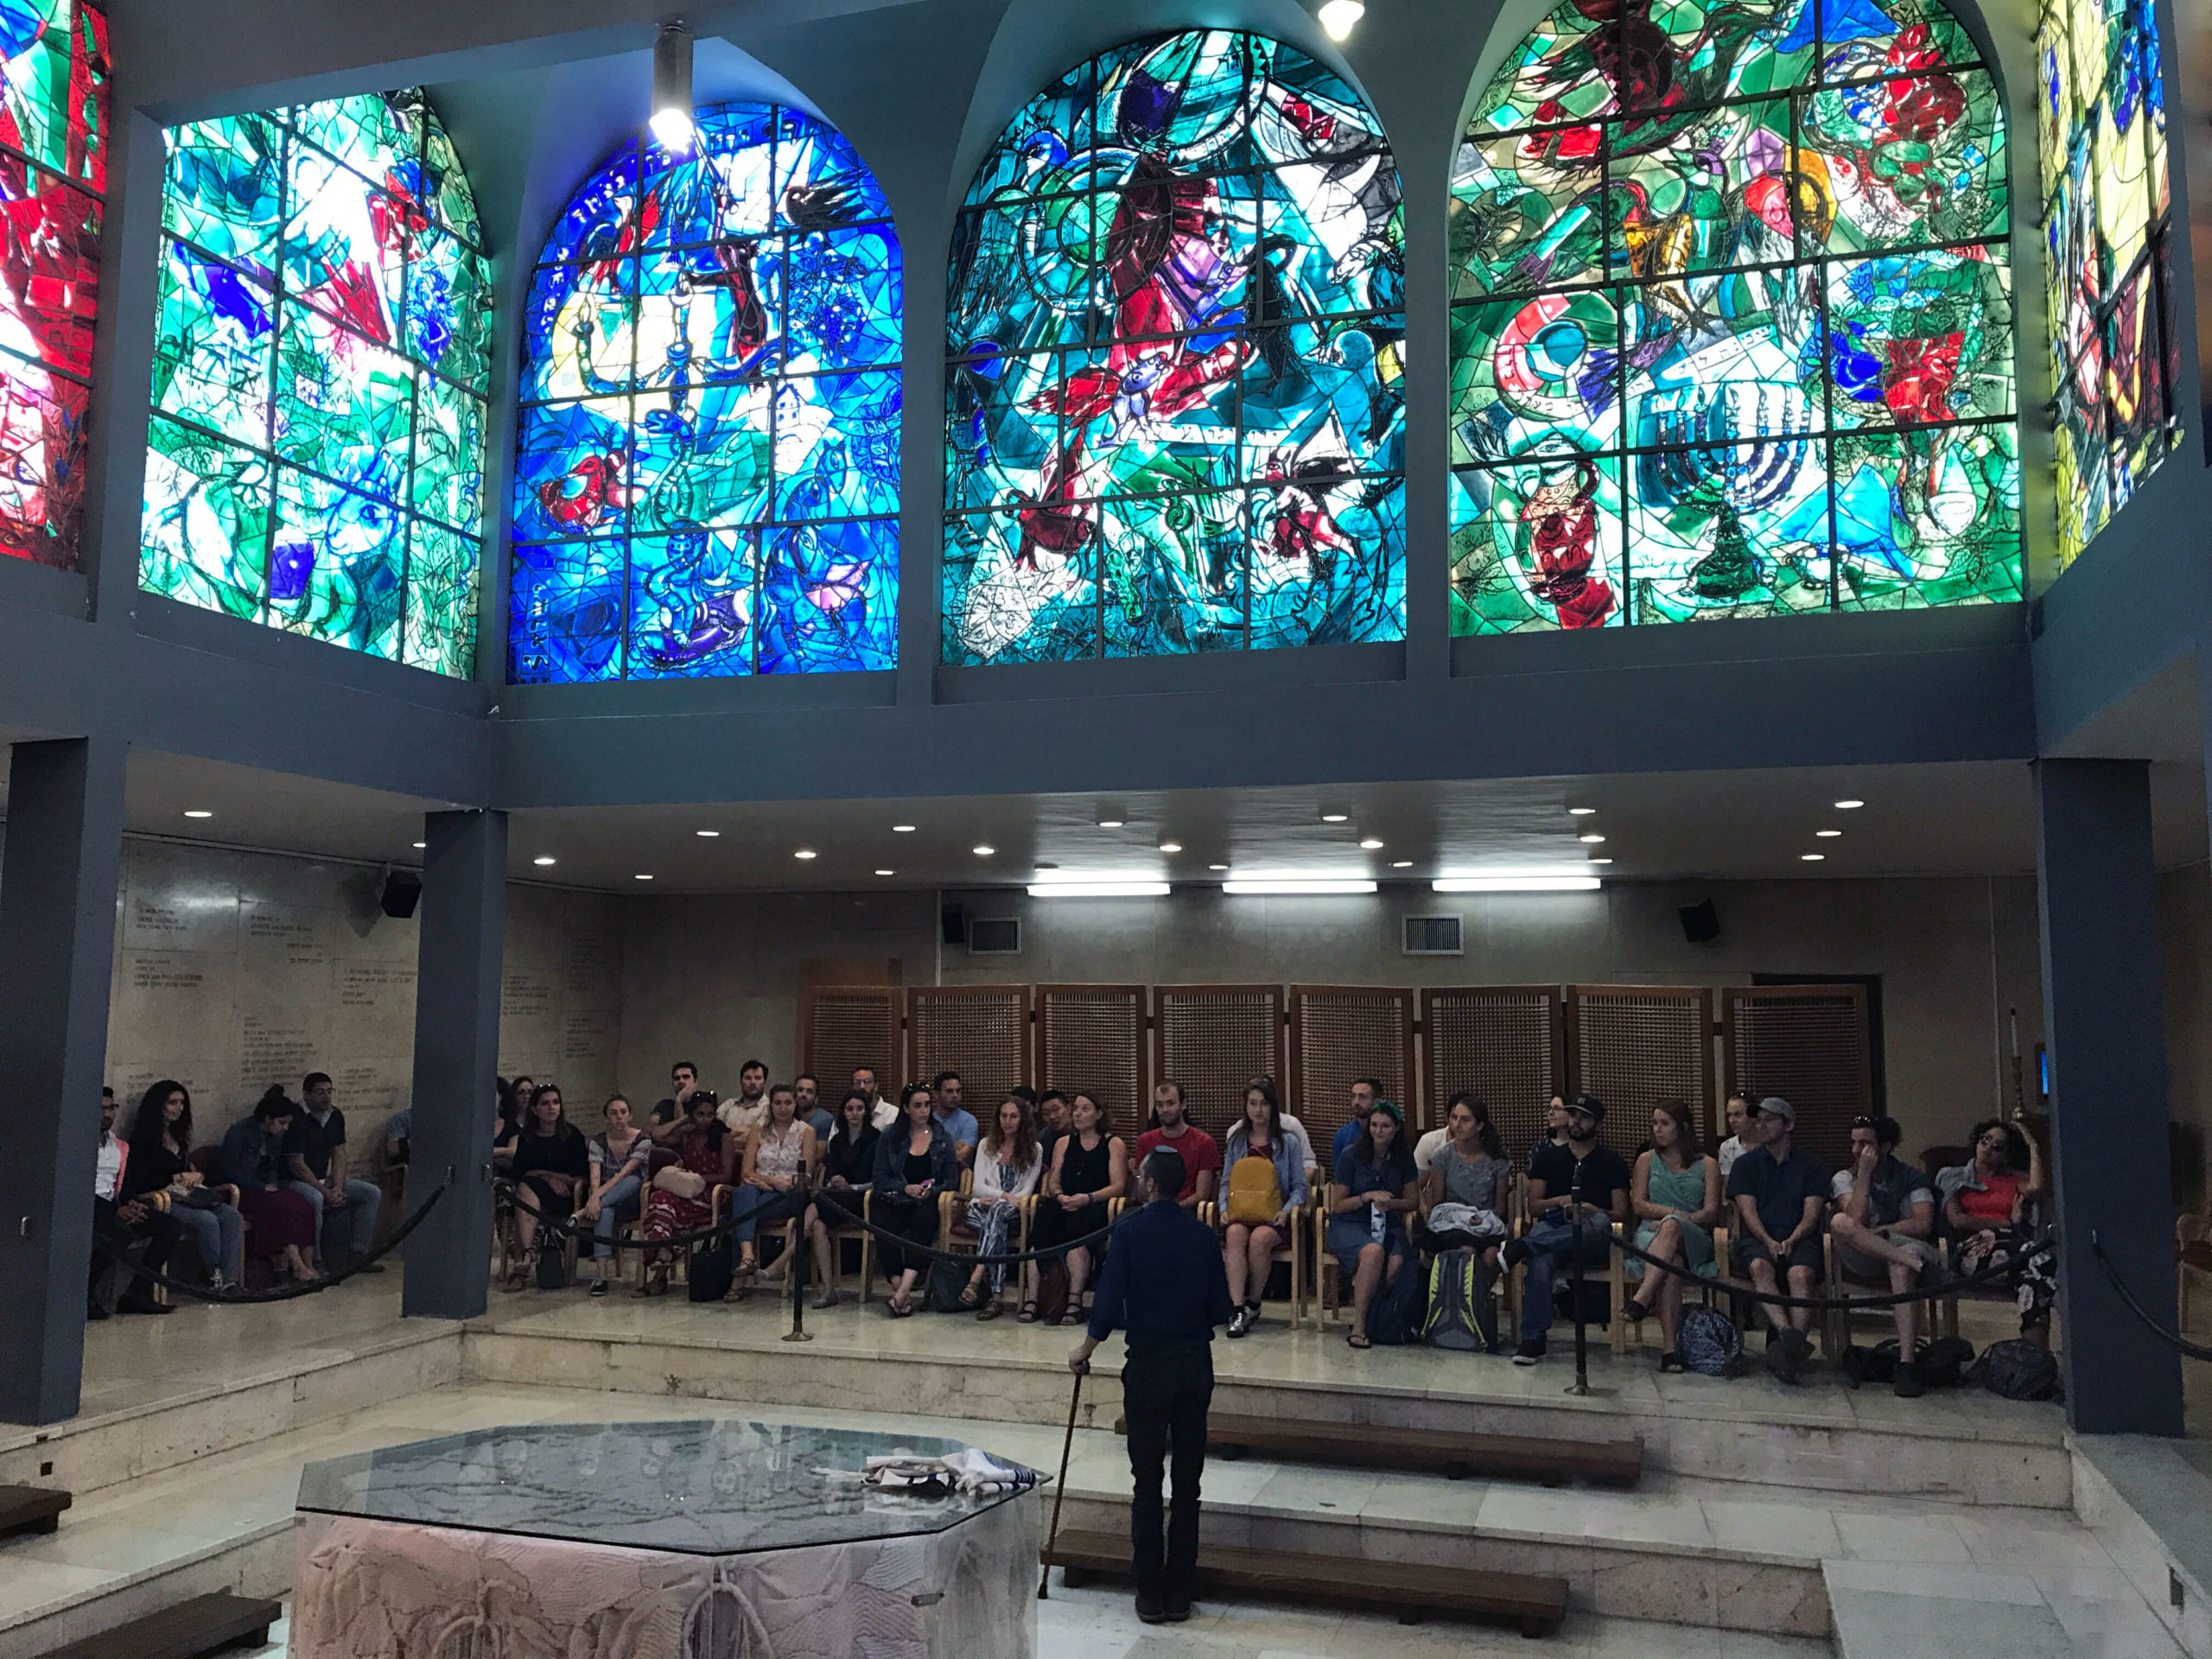 People gathered in room with large stained glass windows